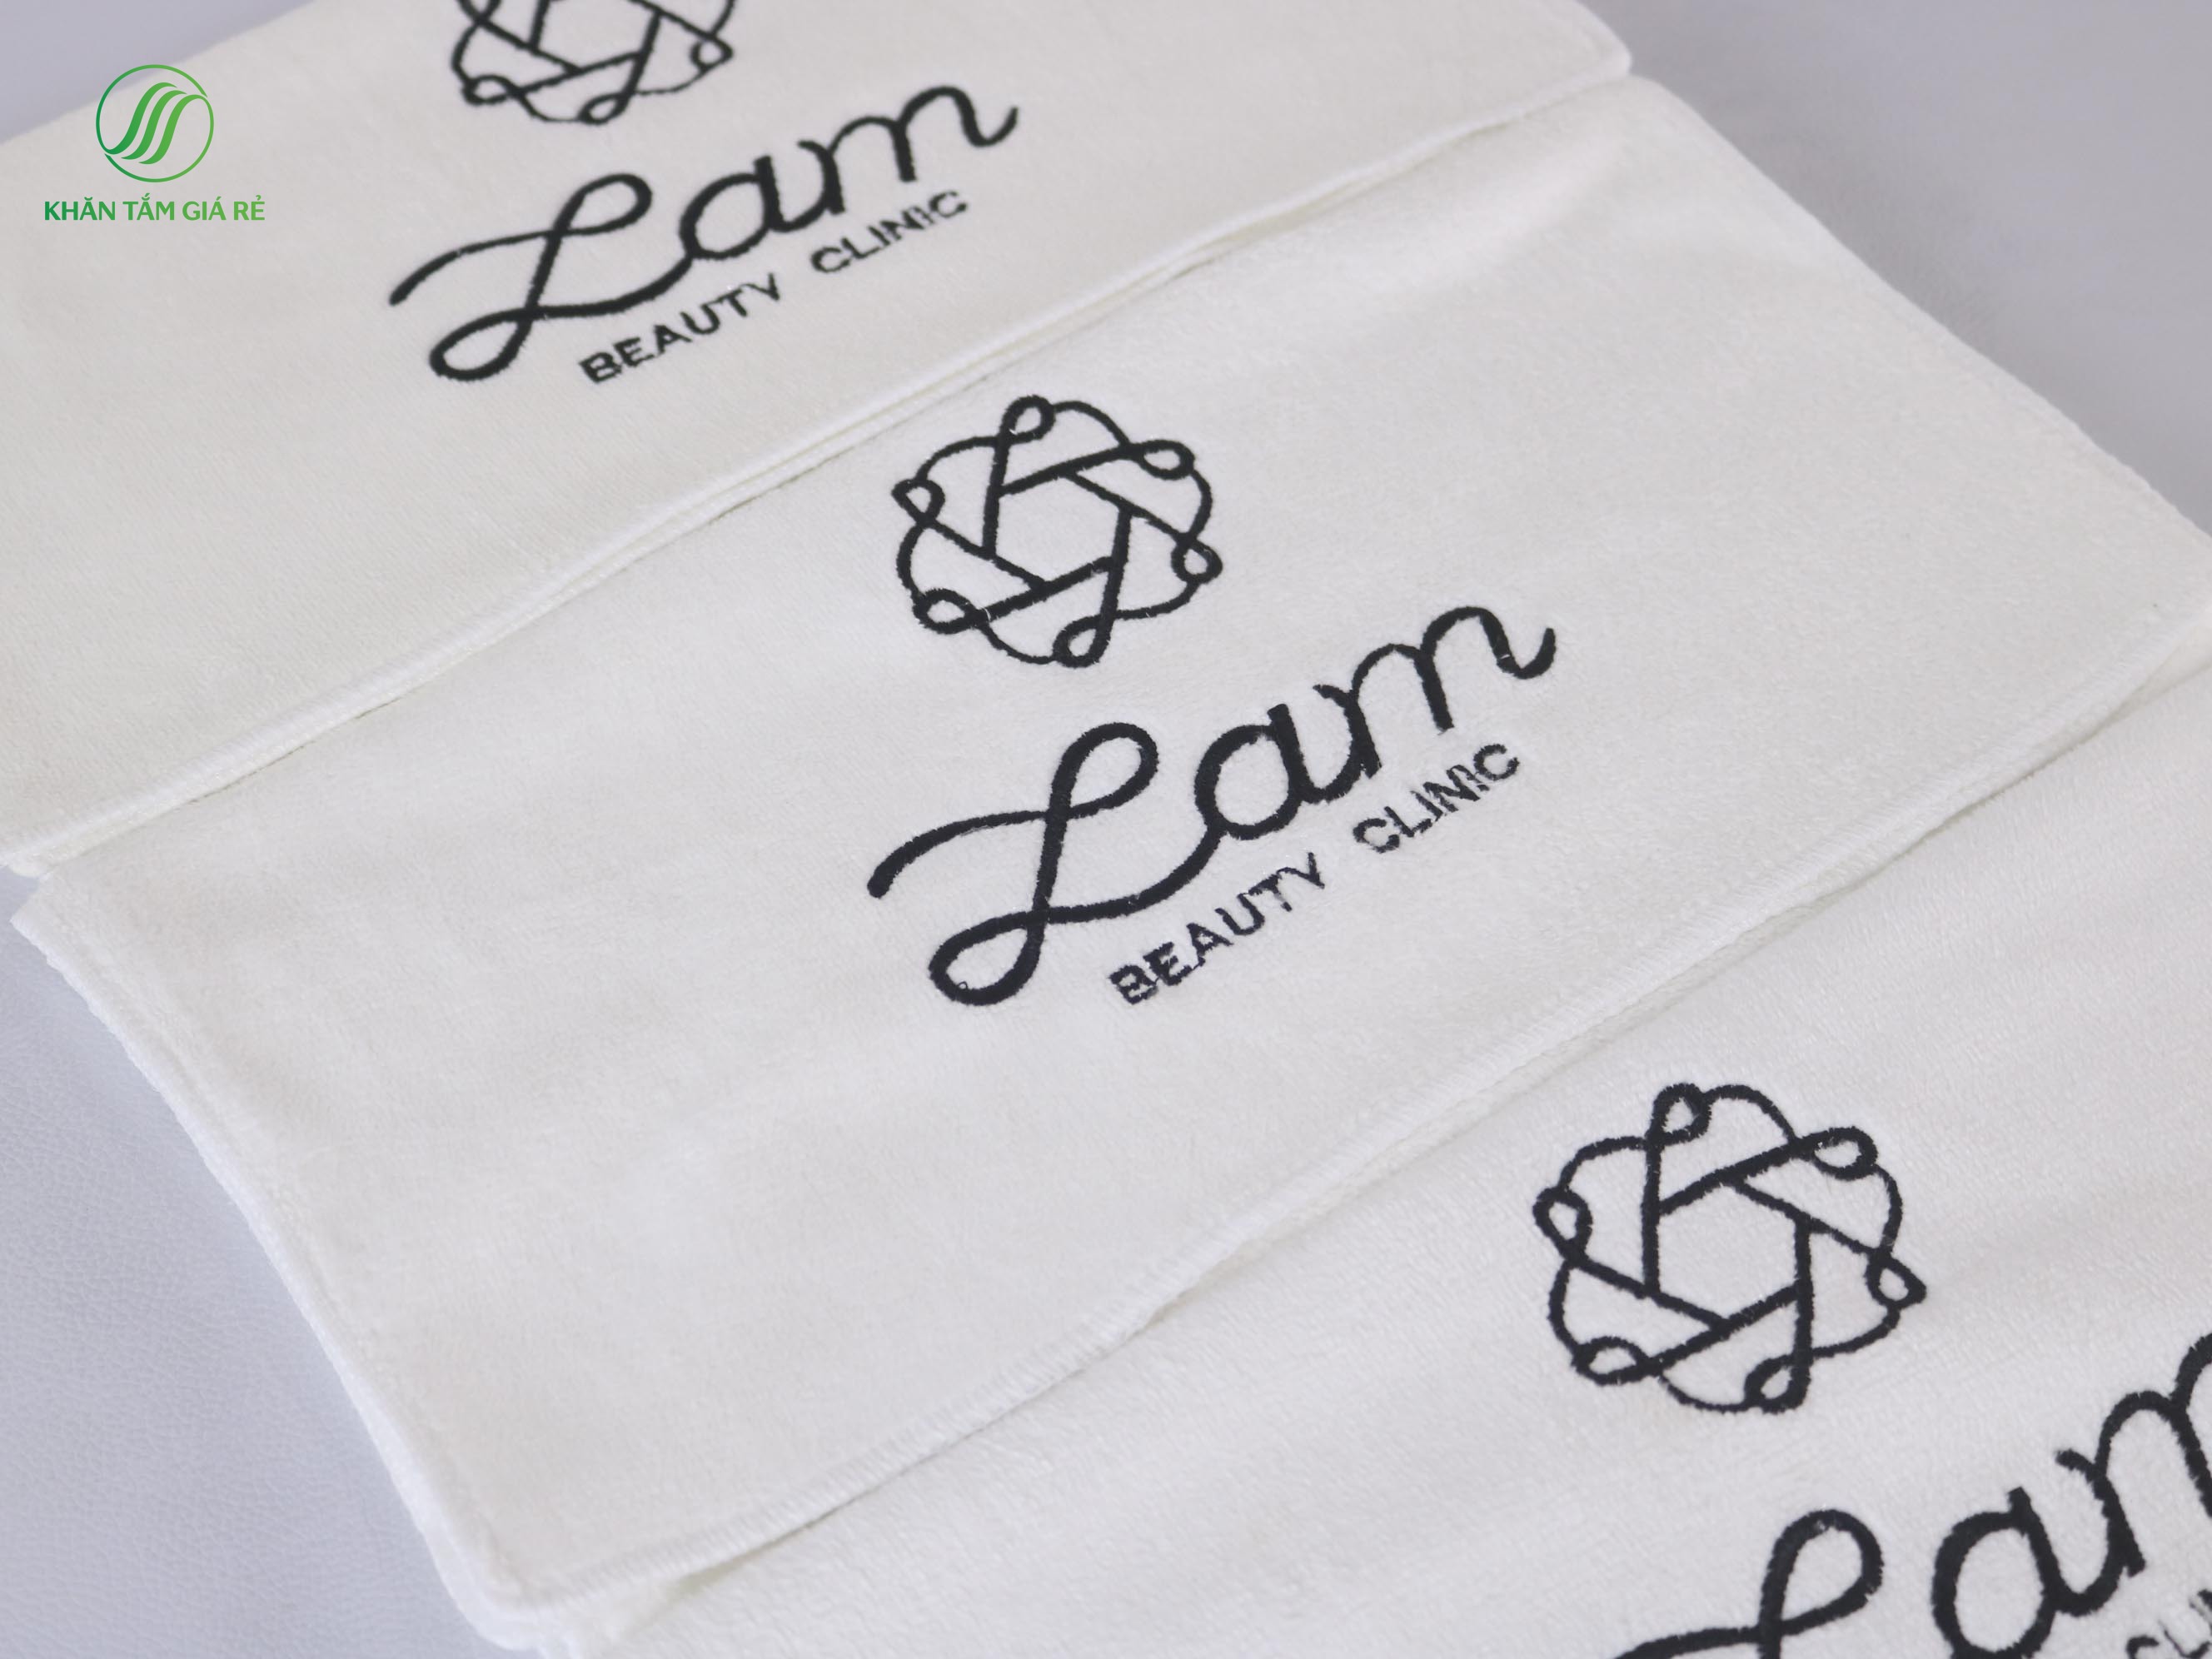 Why spa should choose to use scarf print logo?